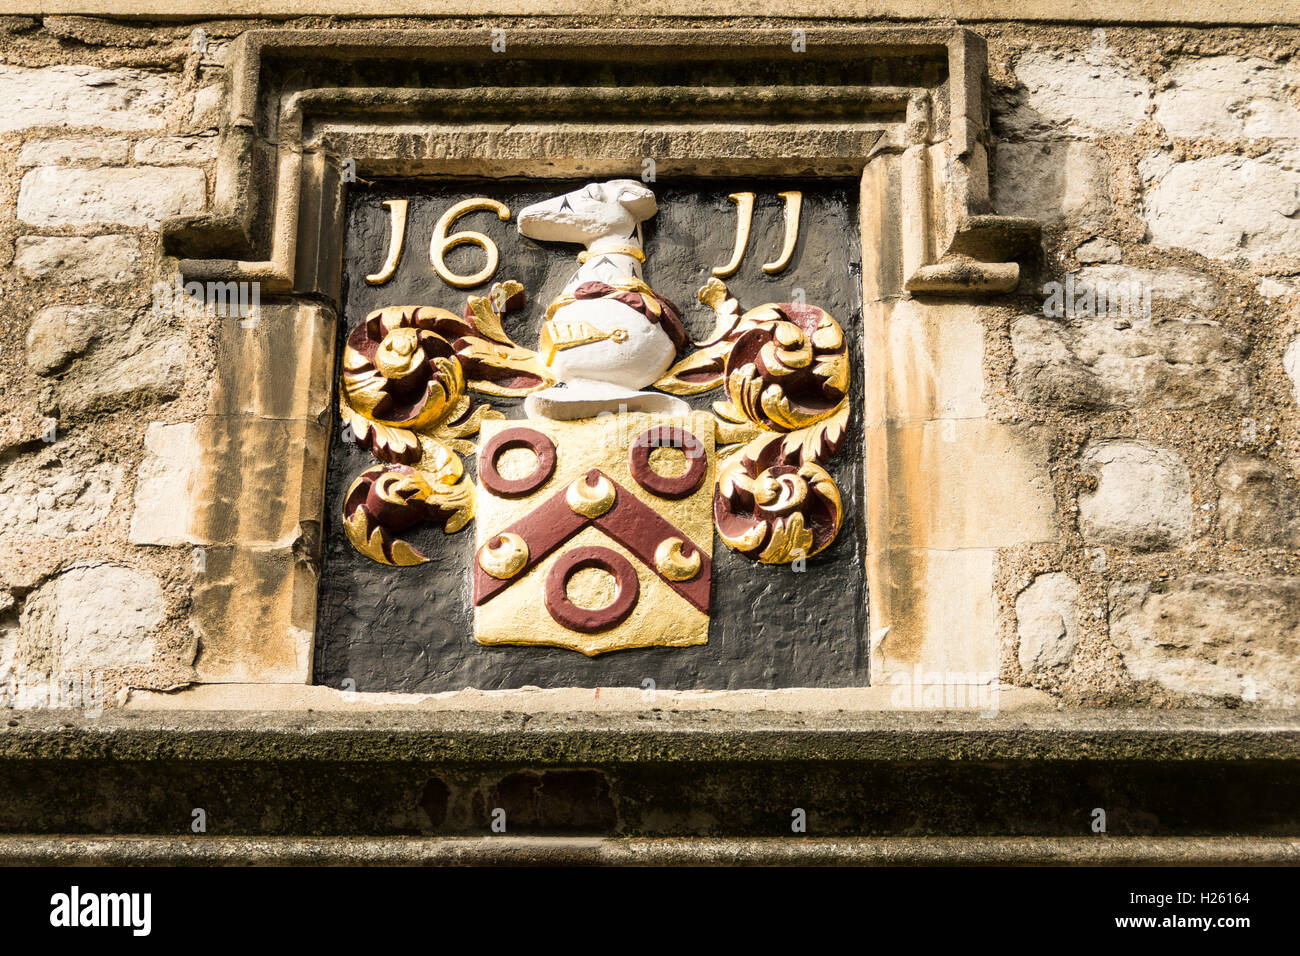 The noble Greyhound on Thomas Sutton's coat of arms outside the Charterhouse in London, EC1, UK Stock Photo